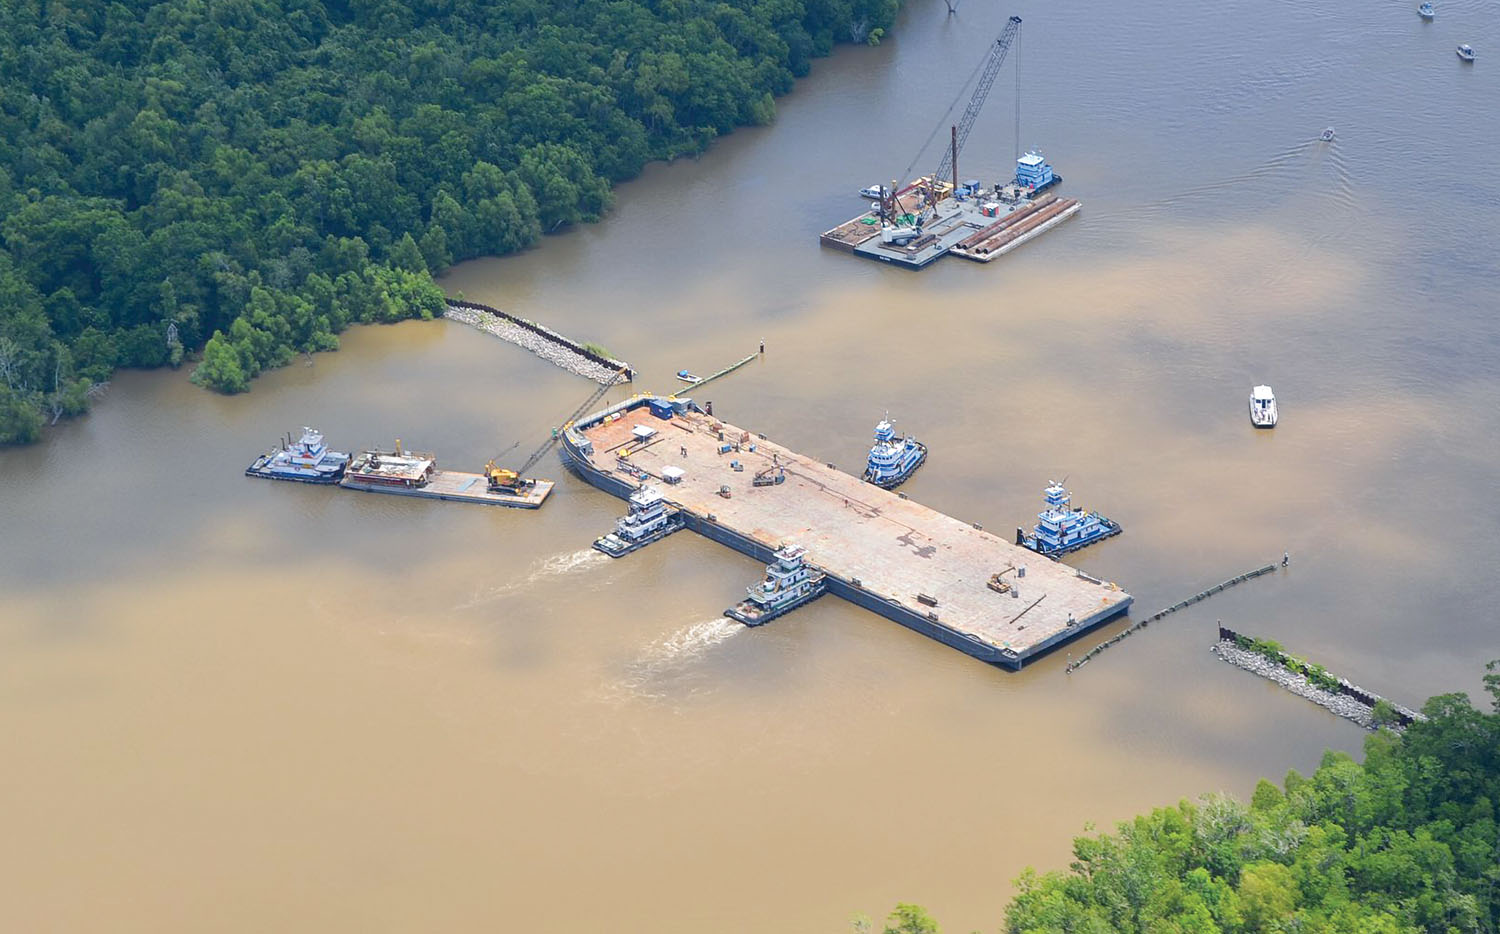 Installation of the ‘barge gate’ across Bayou Chene to prevent backwater flooding, both from the Atchafalaya River and from the potential operation of the Morganza Floodway. (photo courtesy of the Louisiana Civil Air Patrol/St. Mary Parish Office of Emergency Preparedness and Homeland Security)